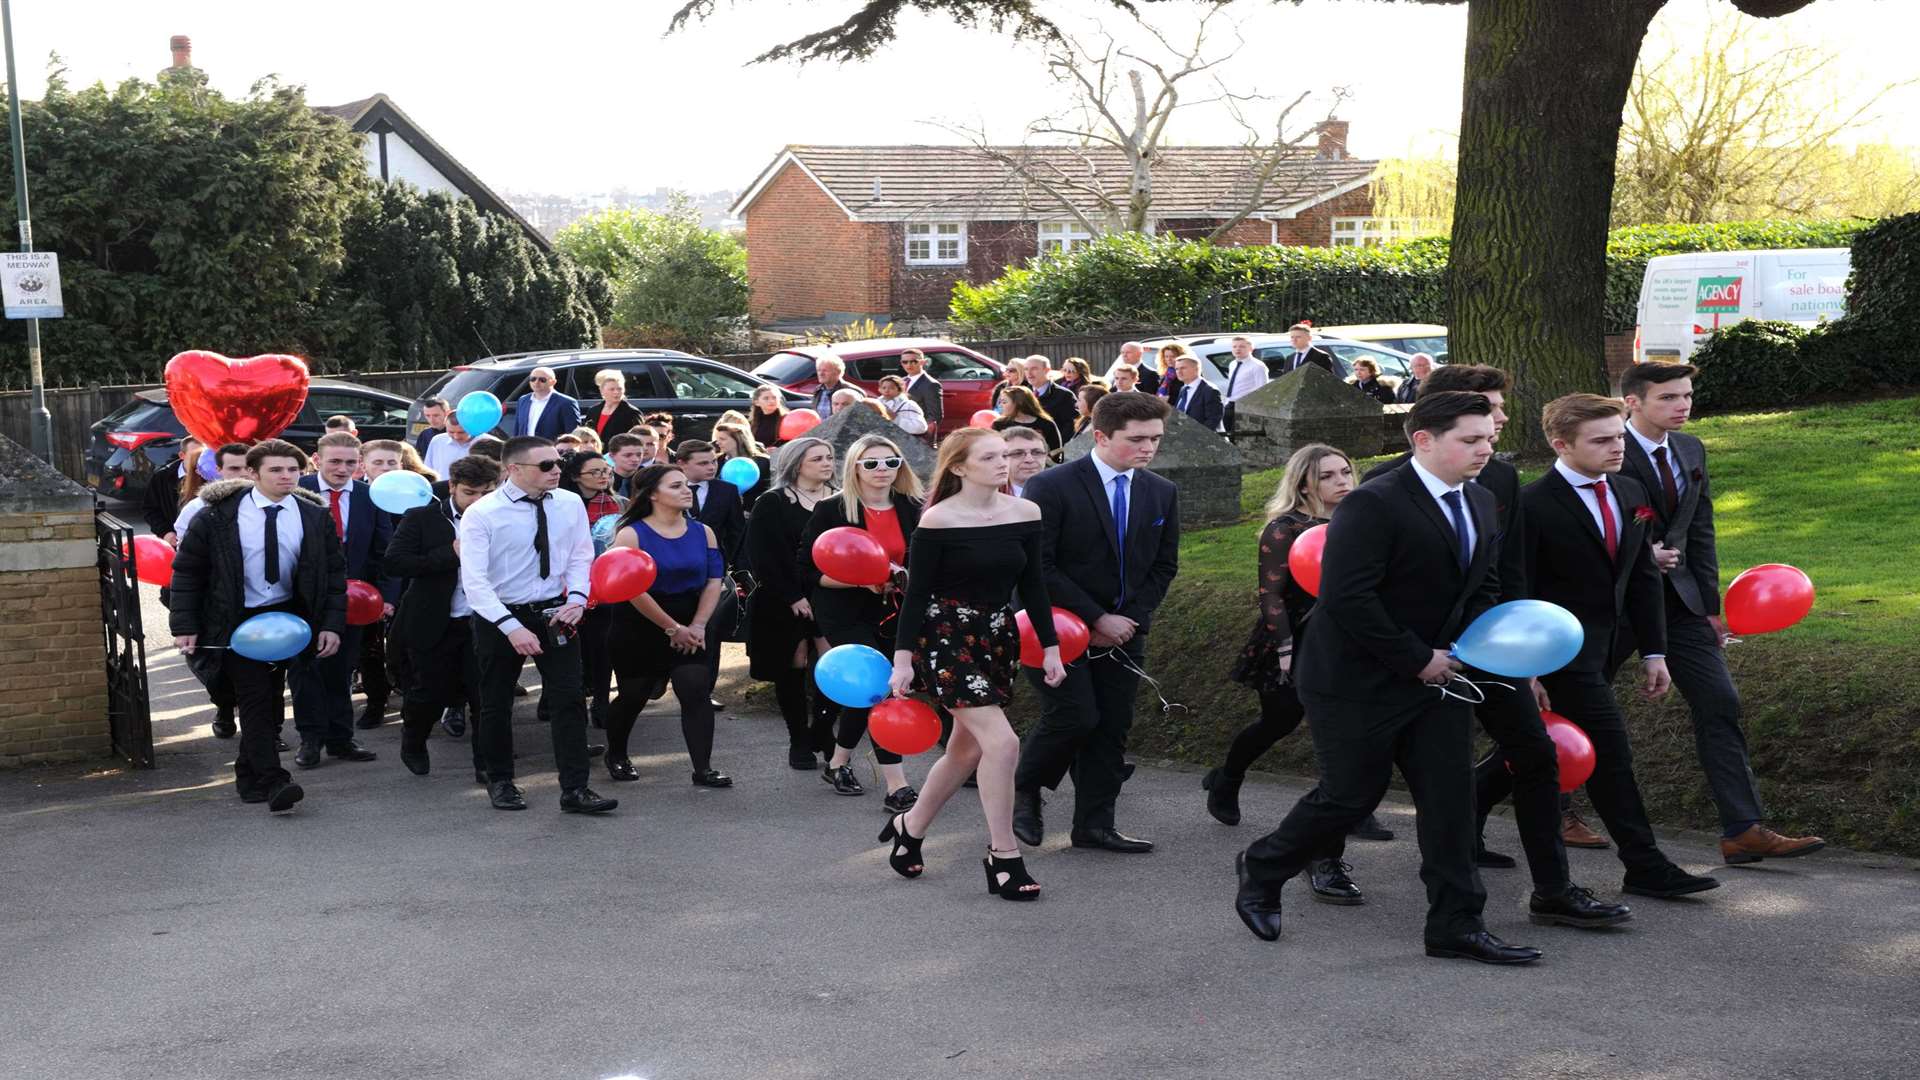 Hundreds turned out for the funeral of Ben Savage